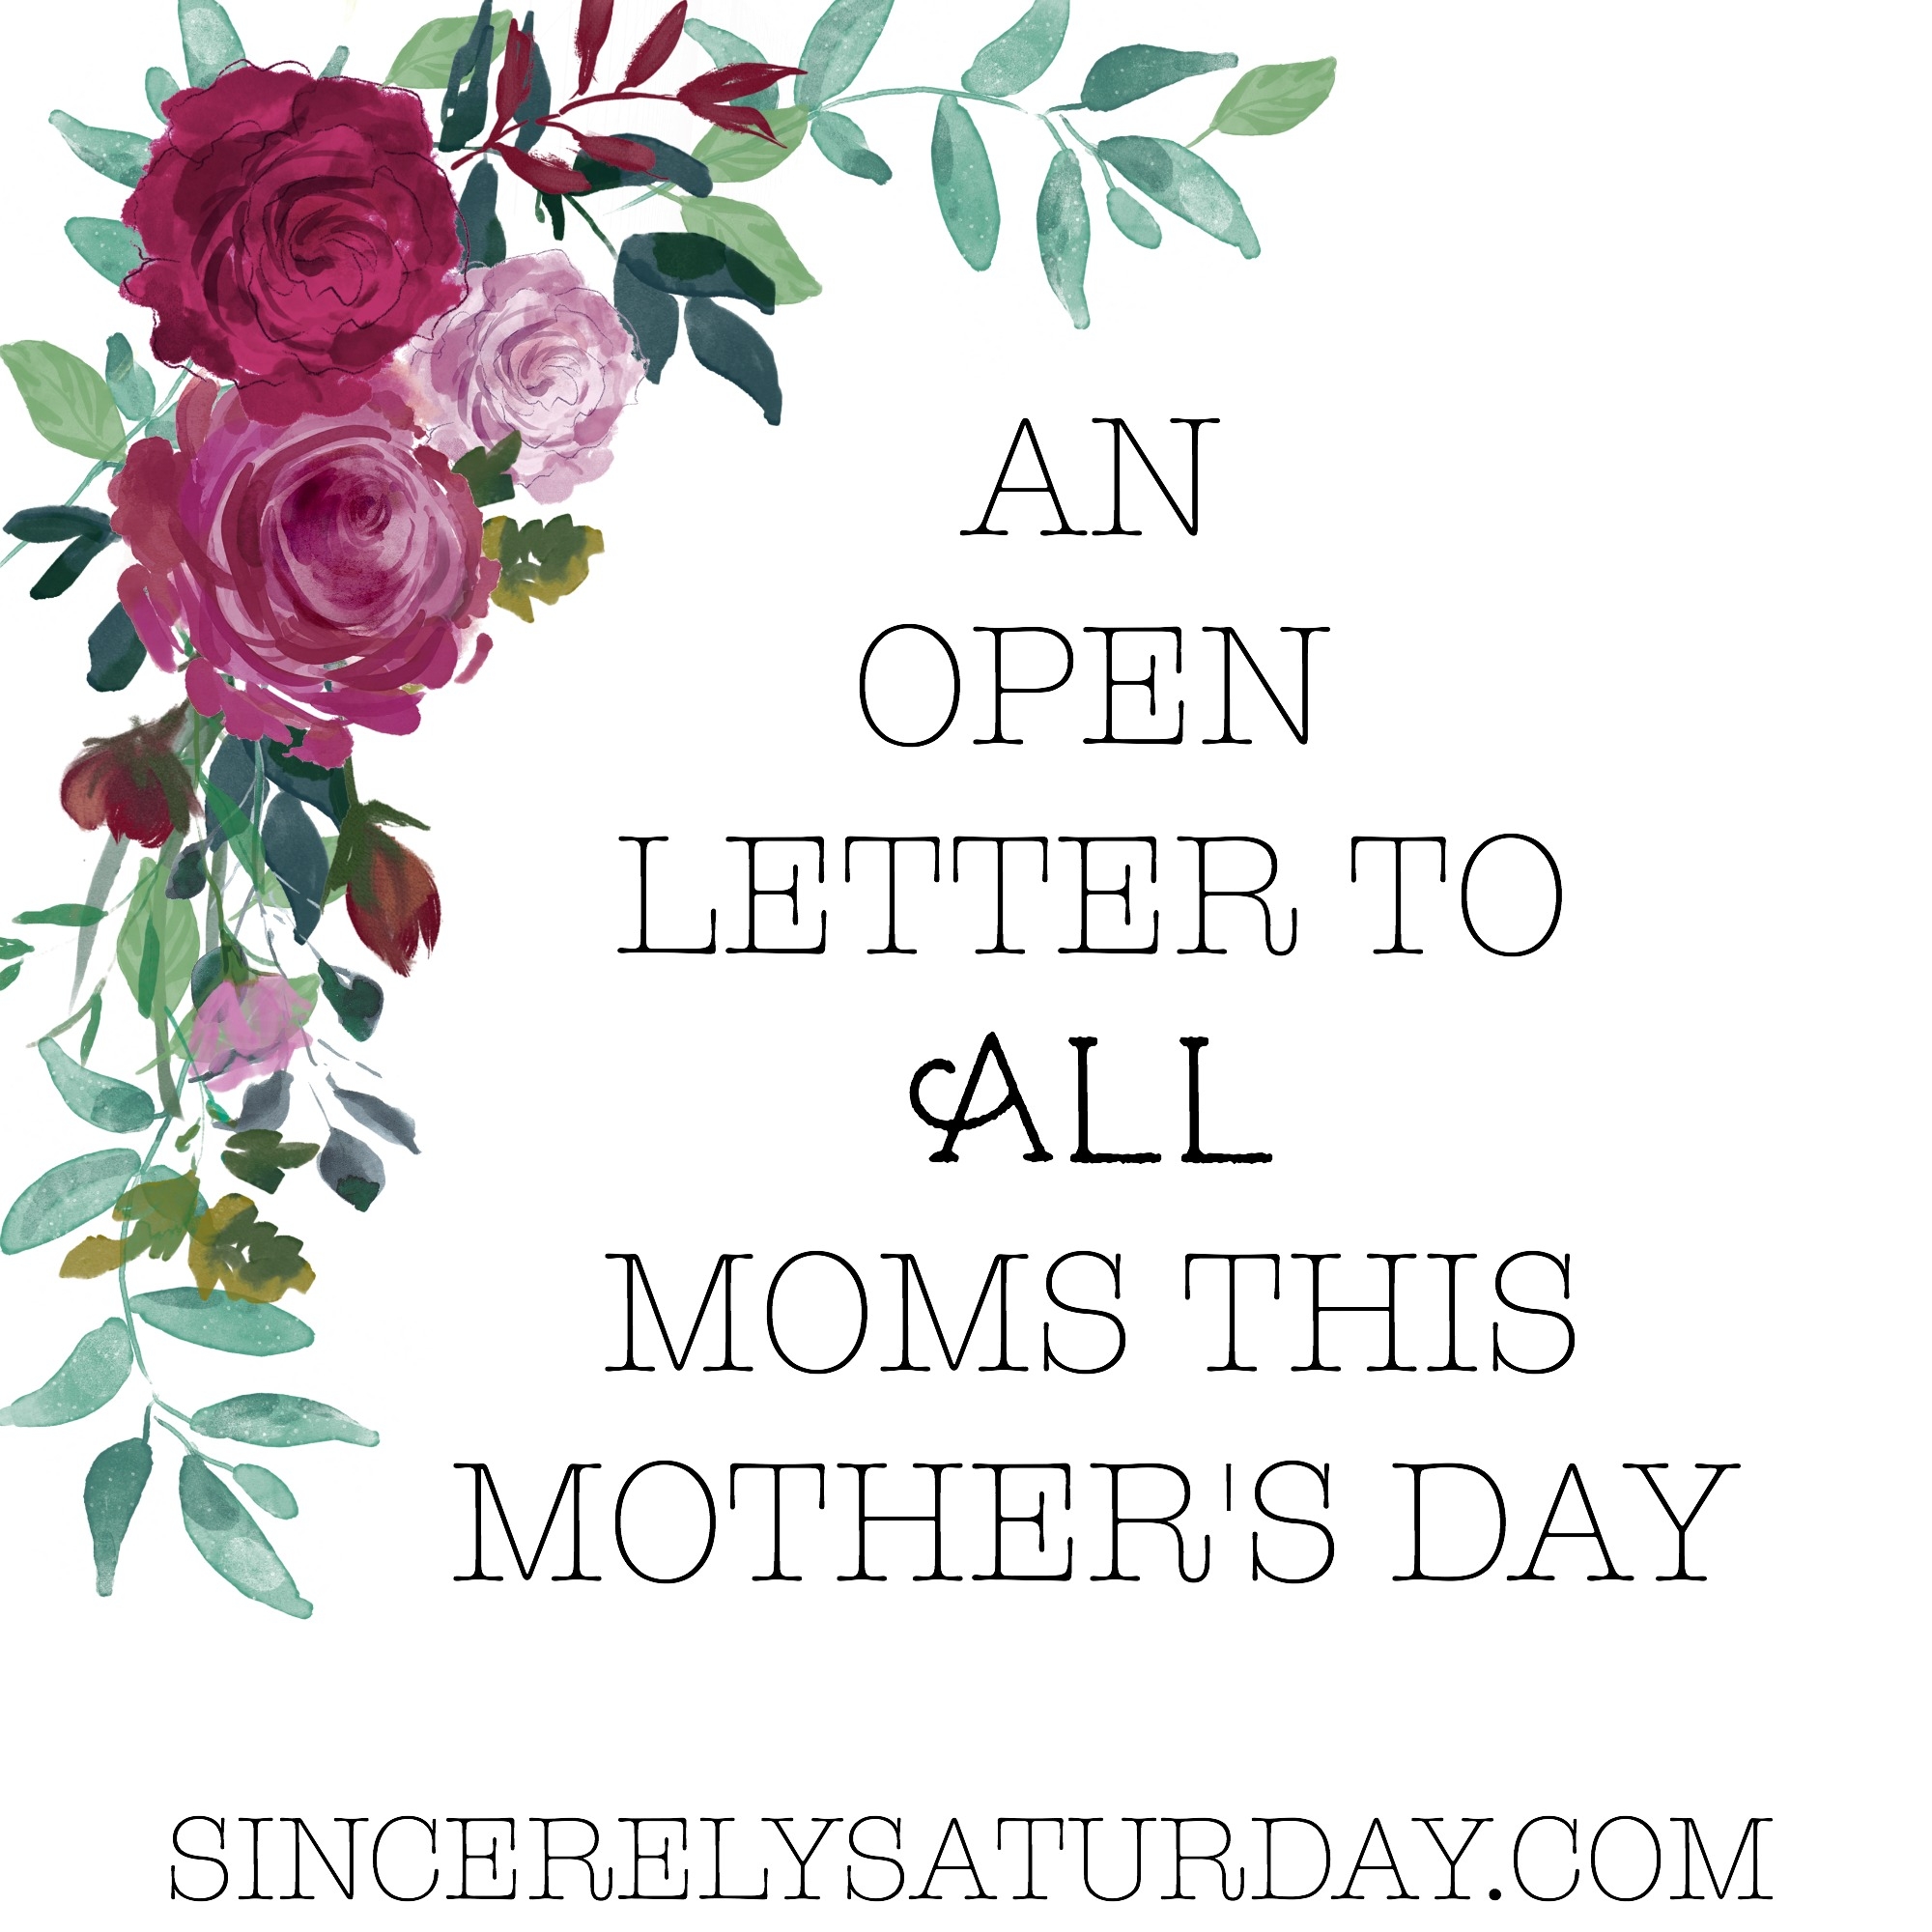 AN OPEN LETTER TO ALL MOMS THIS MOTHER'S DAY